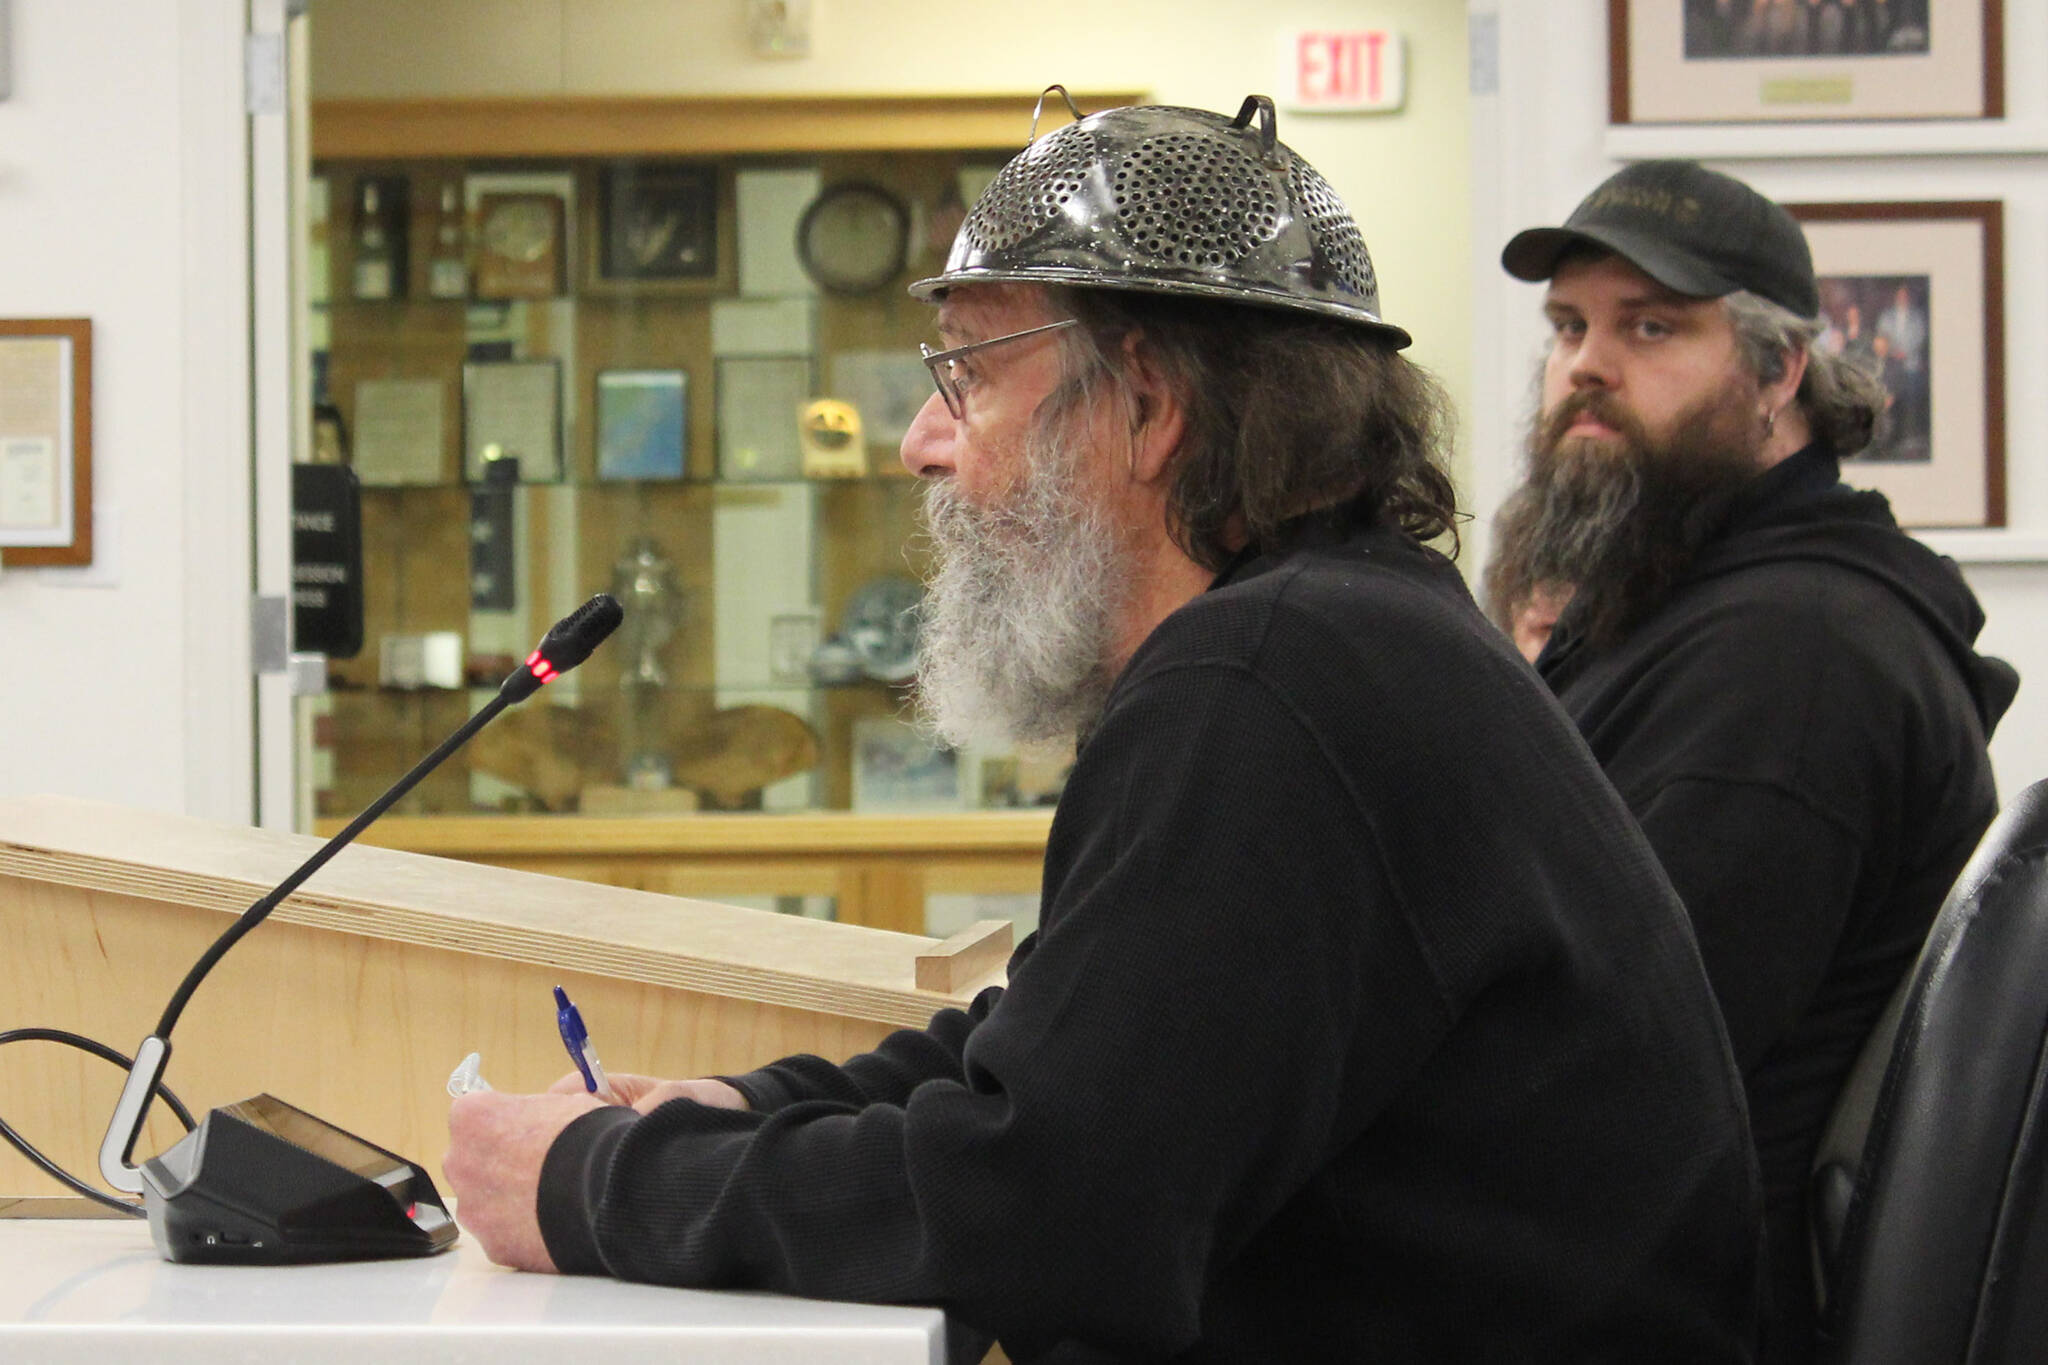 Pastafarian pastor Barrett Fletcher speaks in opposition to a new borough policy, which says only borough volunteer chaplains may deliver the invocation, a during a Kenai Peninsula Borough Assembly meeting on Tuesday, Dec. 12, 2023, in Soldotna, Alaska. (Ashlyn O’Hara/Peninsula Clarion)